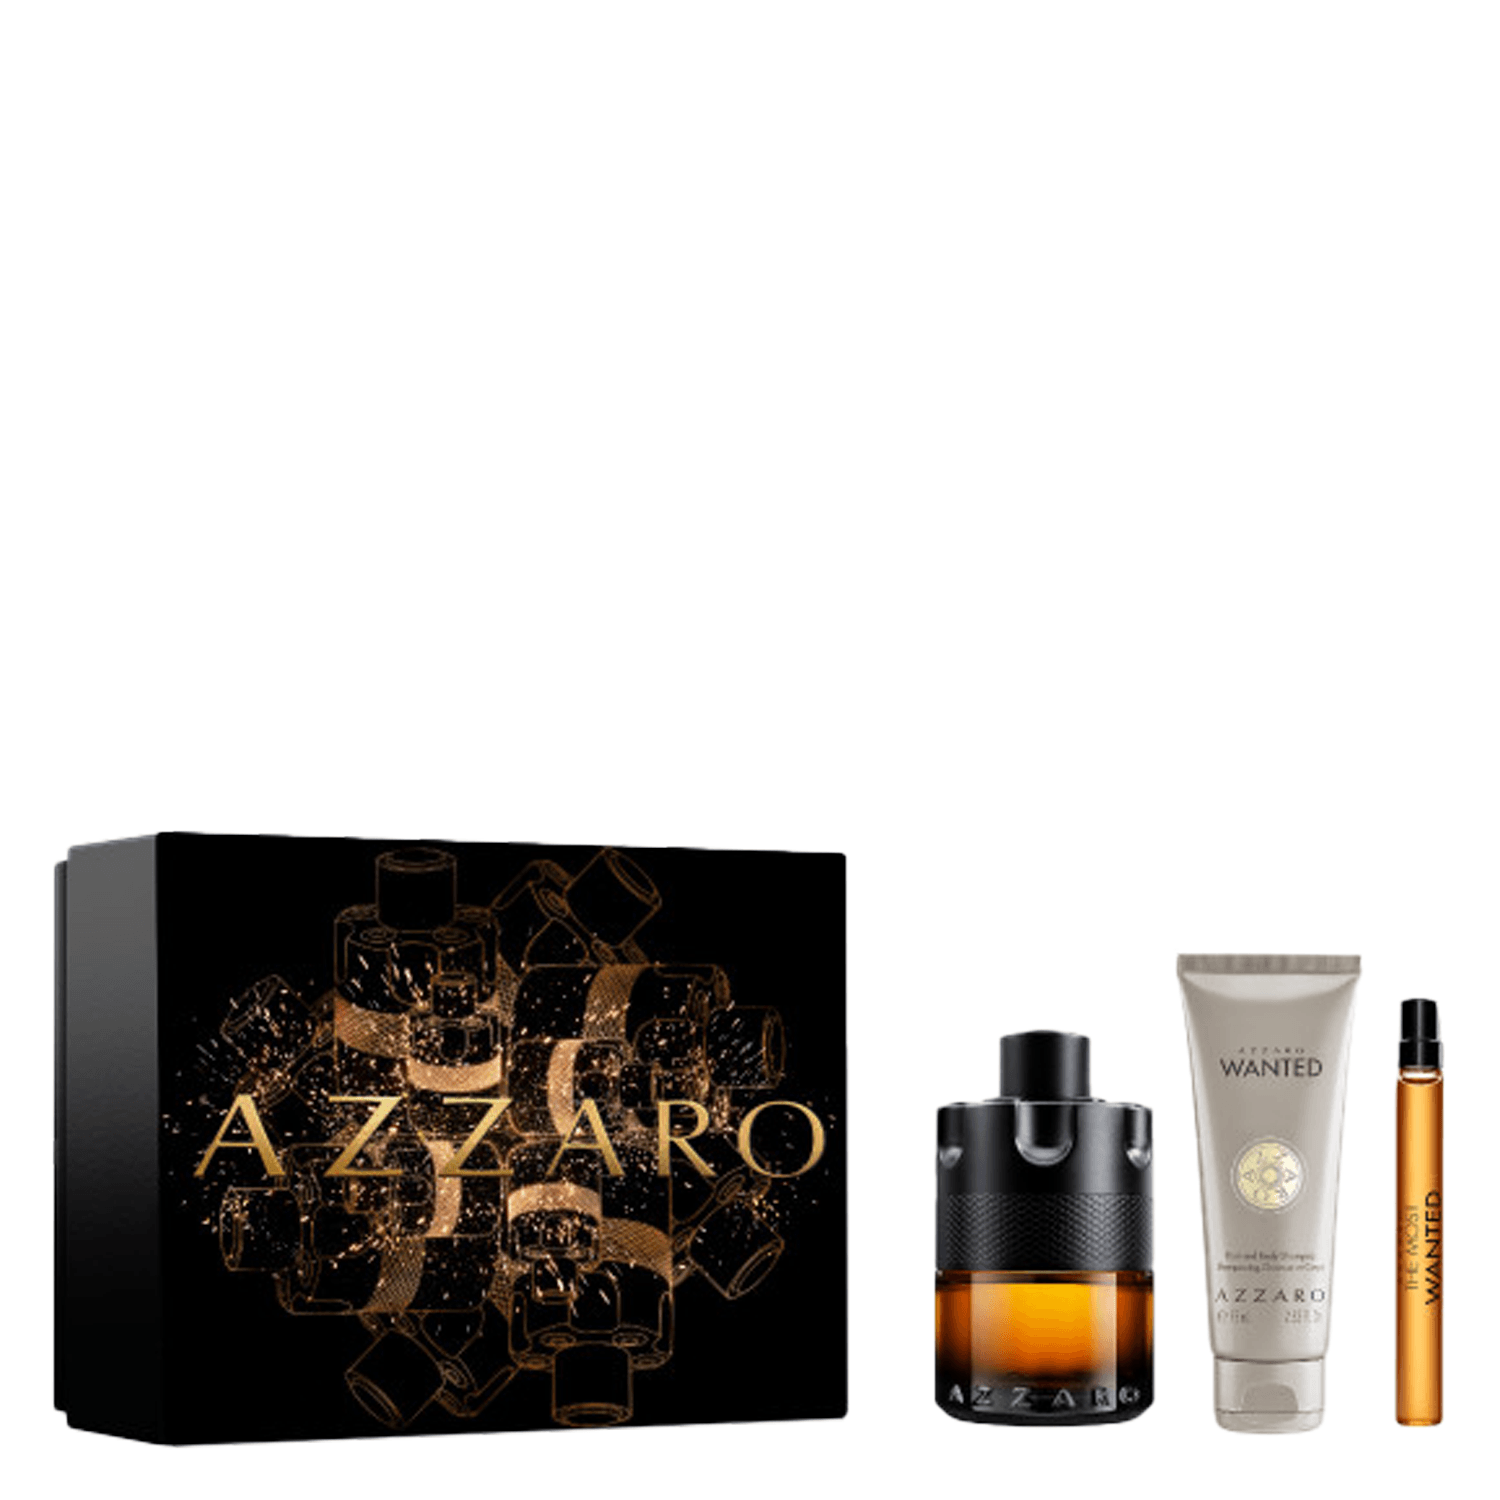 Product image from Azzaro Wanted - The Most Wanted Le Parfum Set